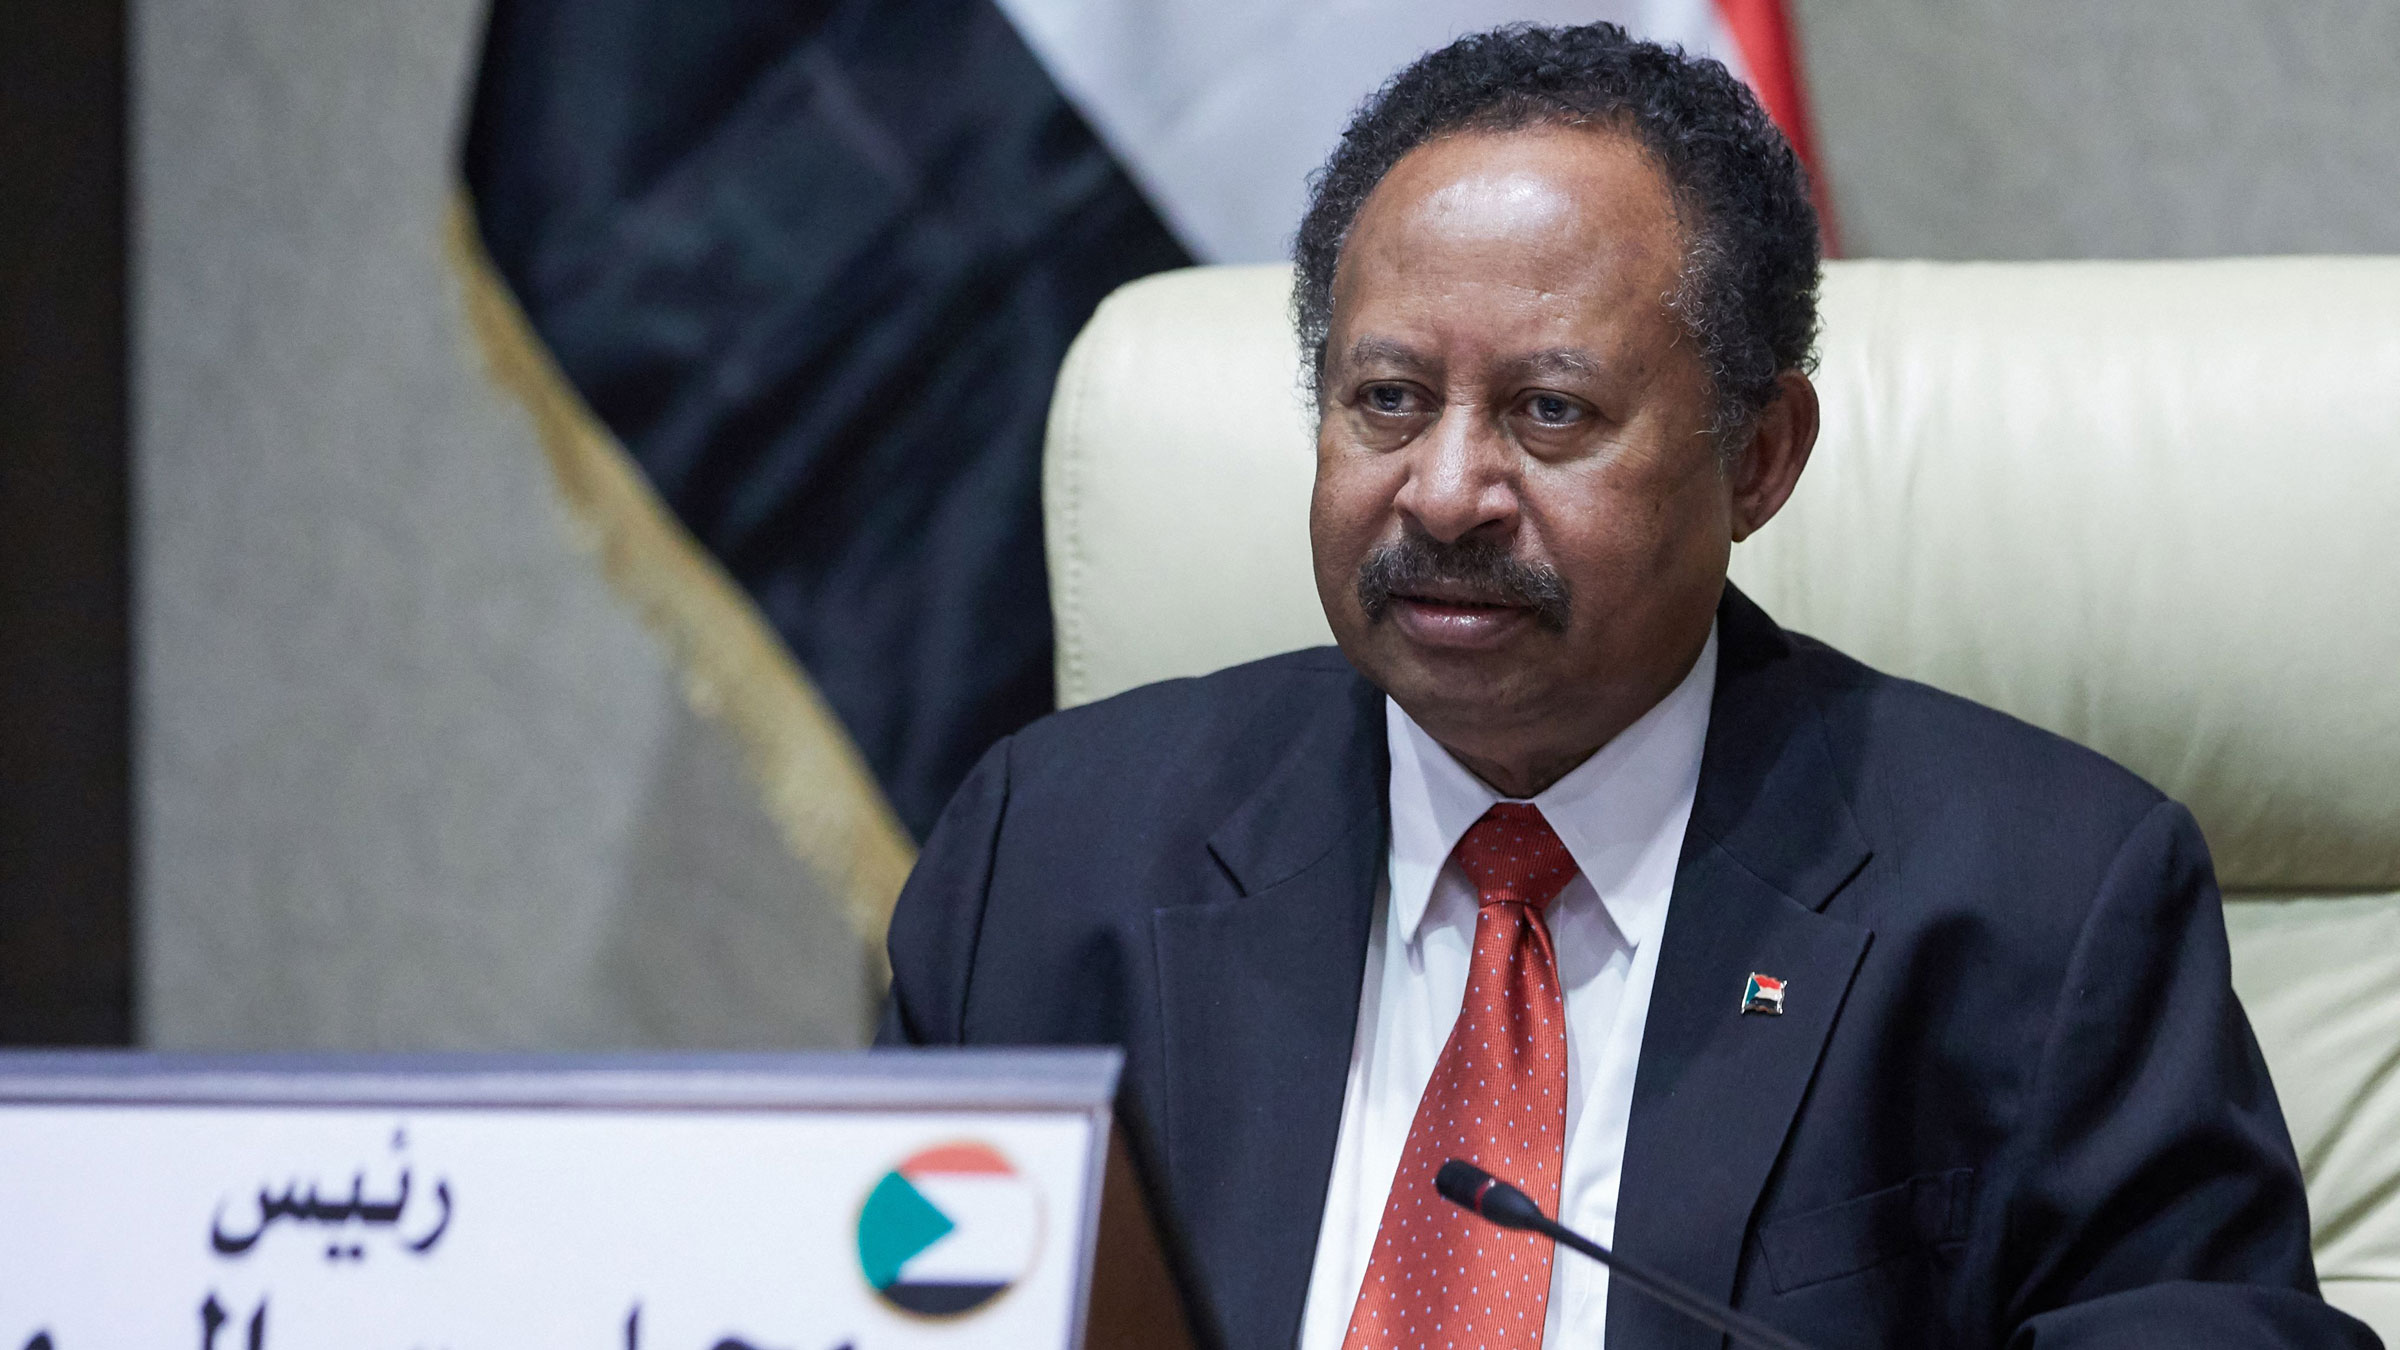 Sudan Prime Minister Abdalla Hamdok chairs an emergency cabinet session in the capital of Khartoum last week.